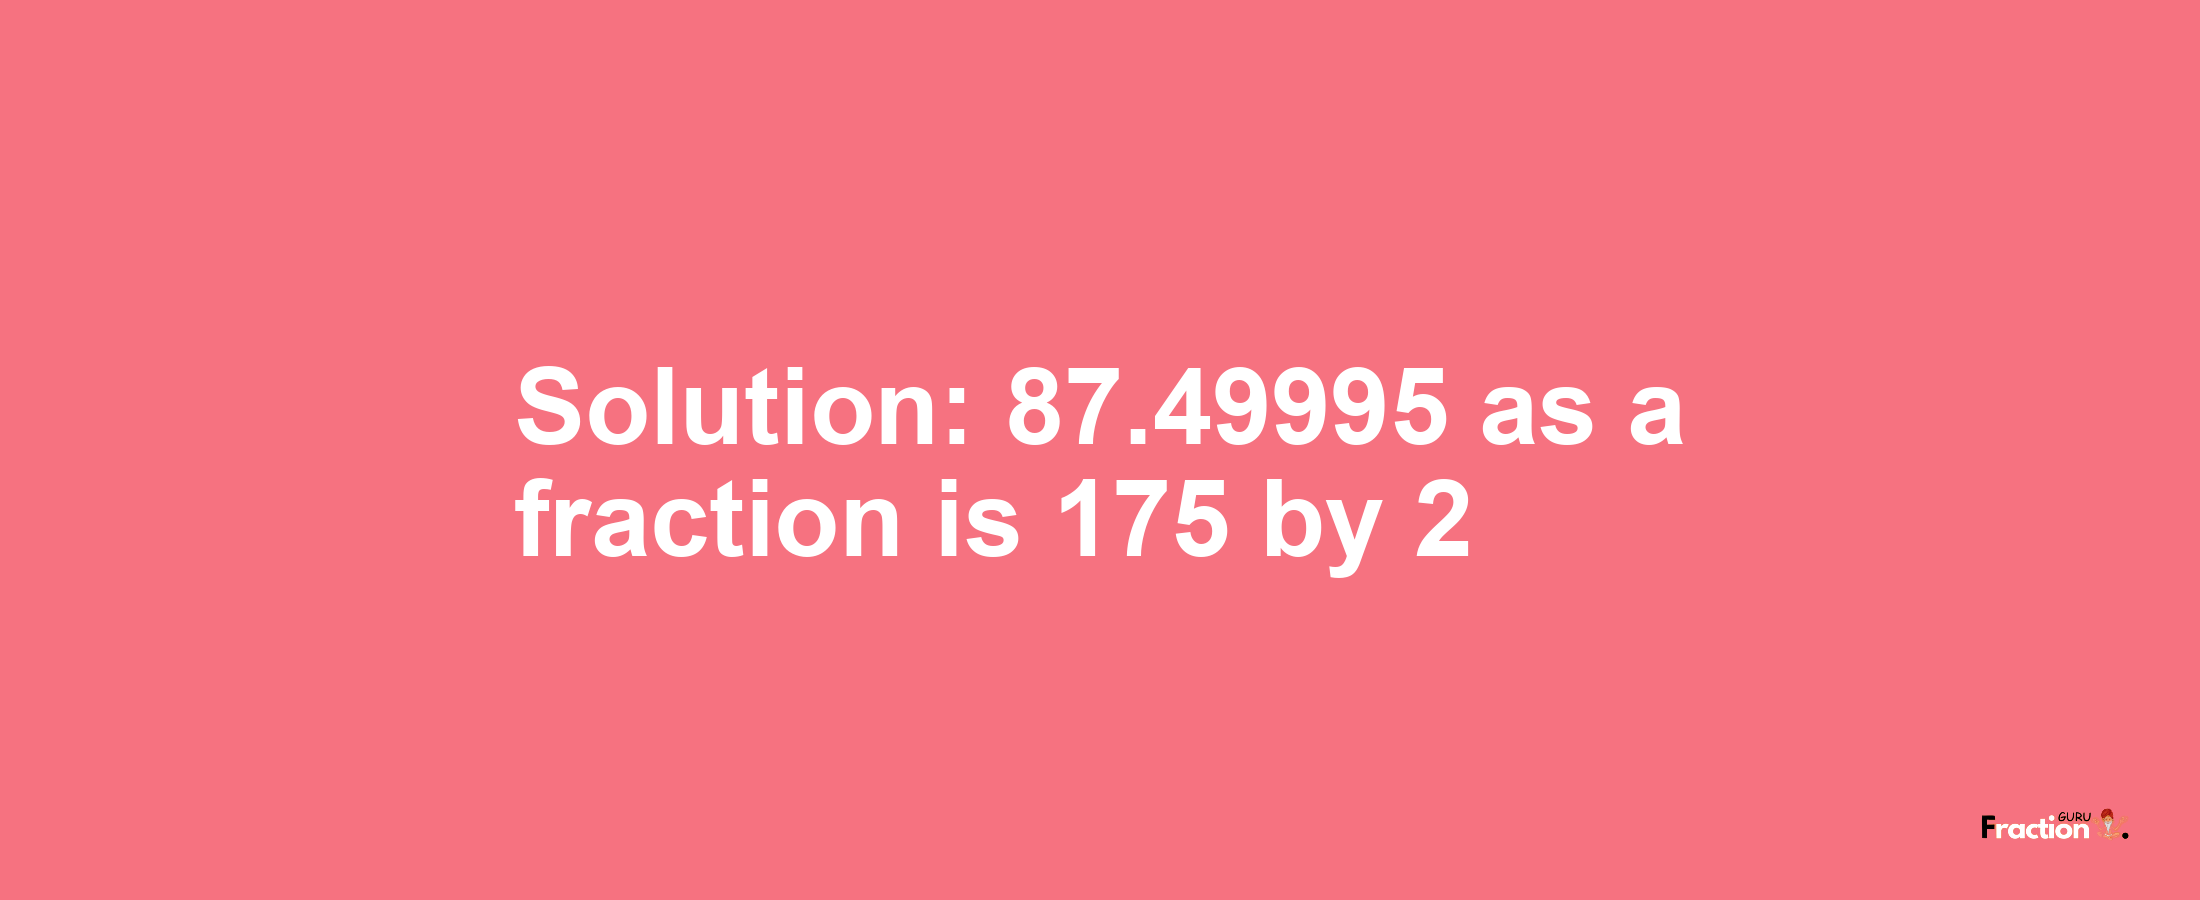 Solution:87.49995 as a fraction is 175/2